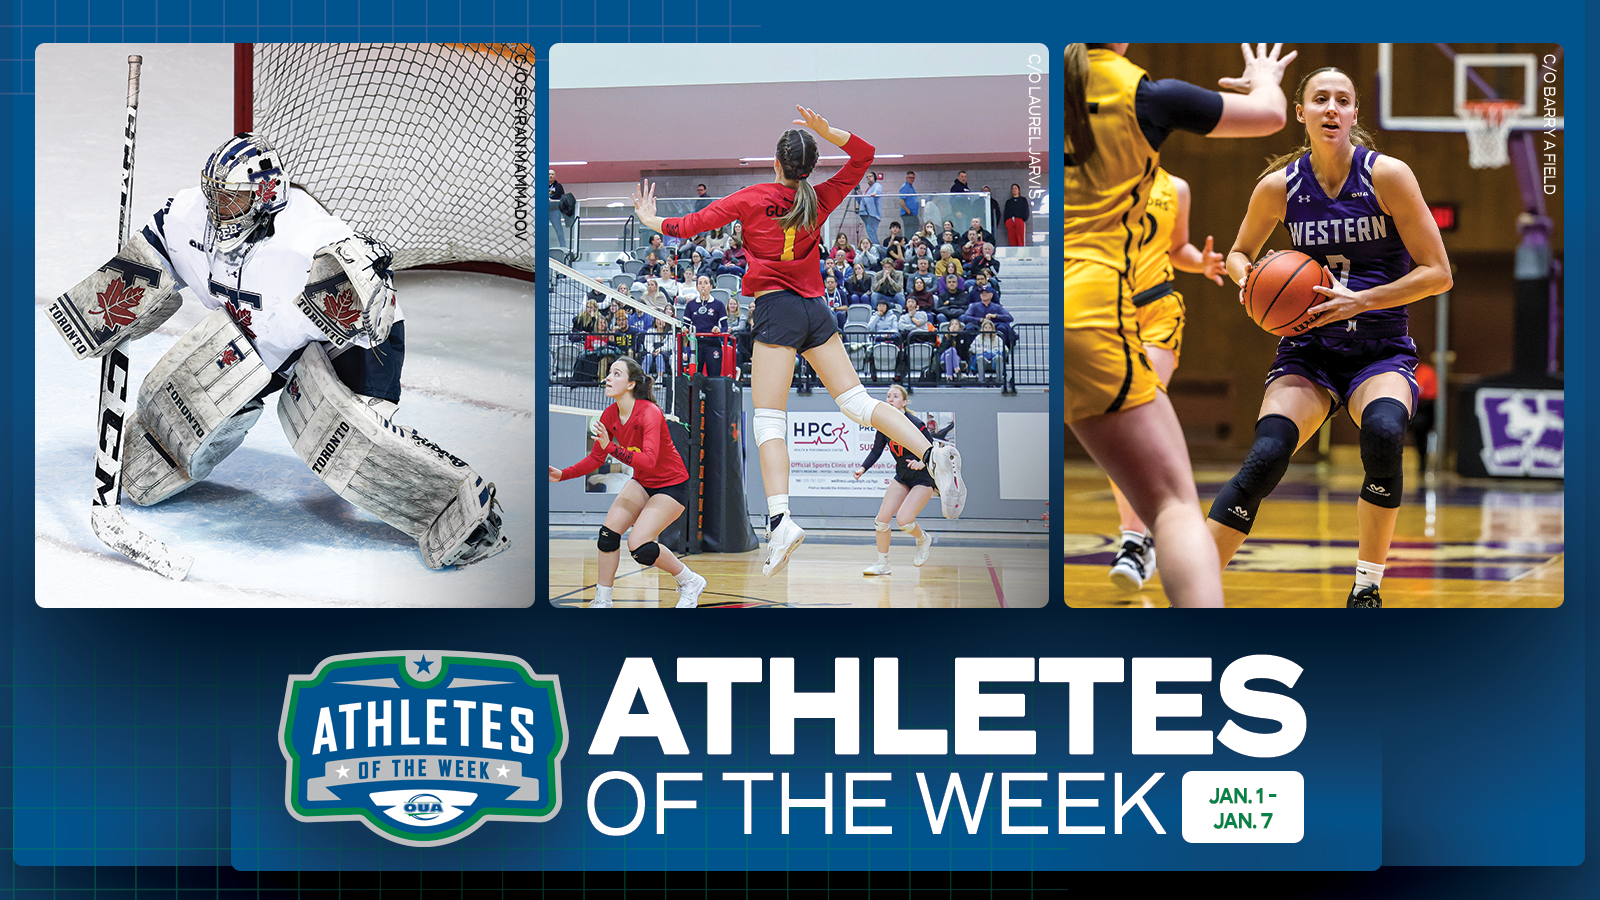 Graphic on predominantly blue background featuring action photos of three athletes. From left to right: Erica Fryer a Toronto Varsity Blues Women's Hockey Player, in the middle is Briar Crerar of Guelph Gryphons Volleyball, on the right is Mackeely Shantz from Western Mustangs Basketball with the OUA Athletes of the Week logo and large white 'Athletes of the Week' text in the lower third